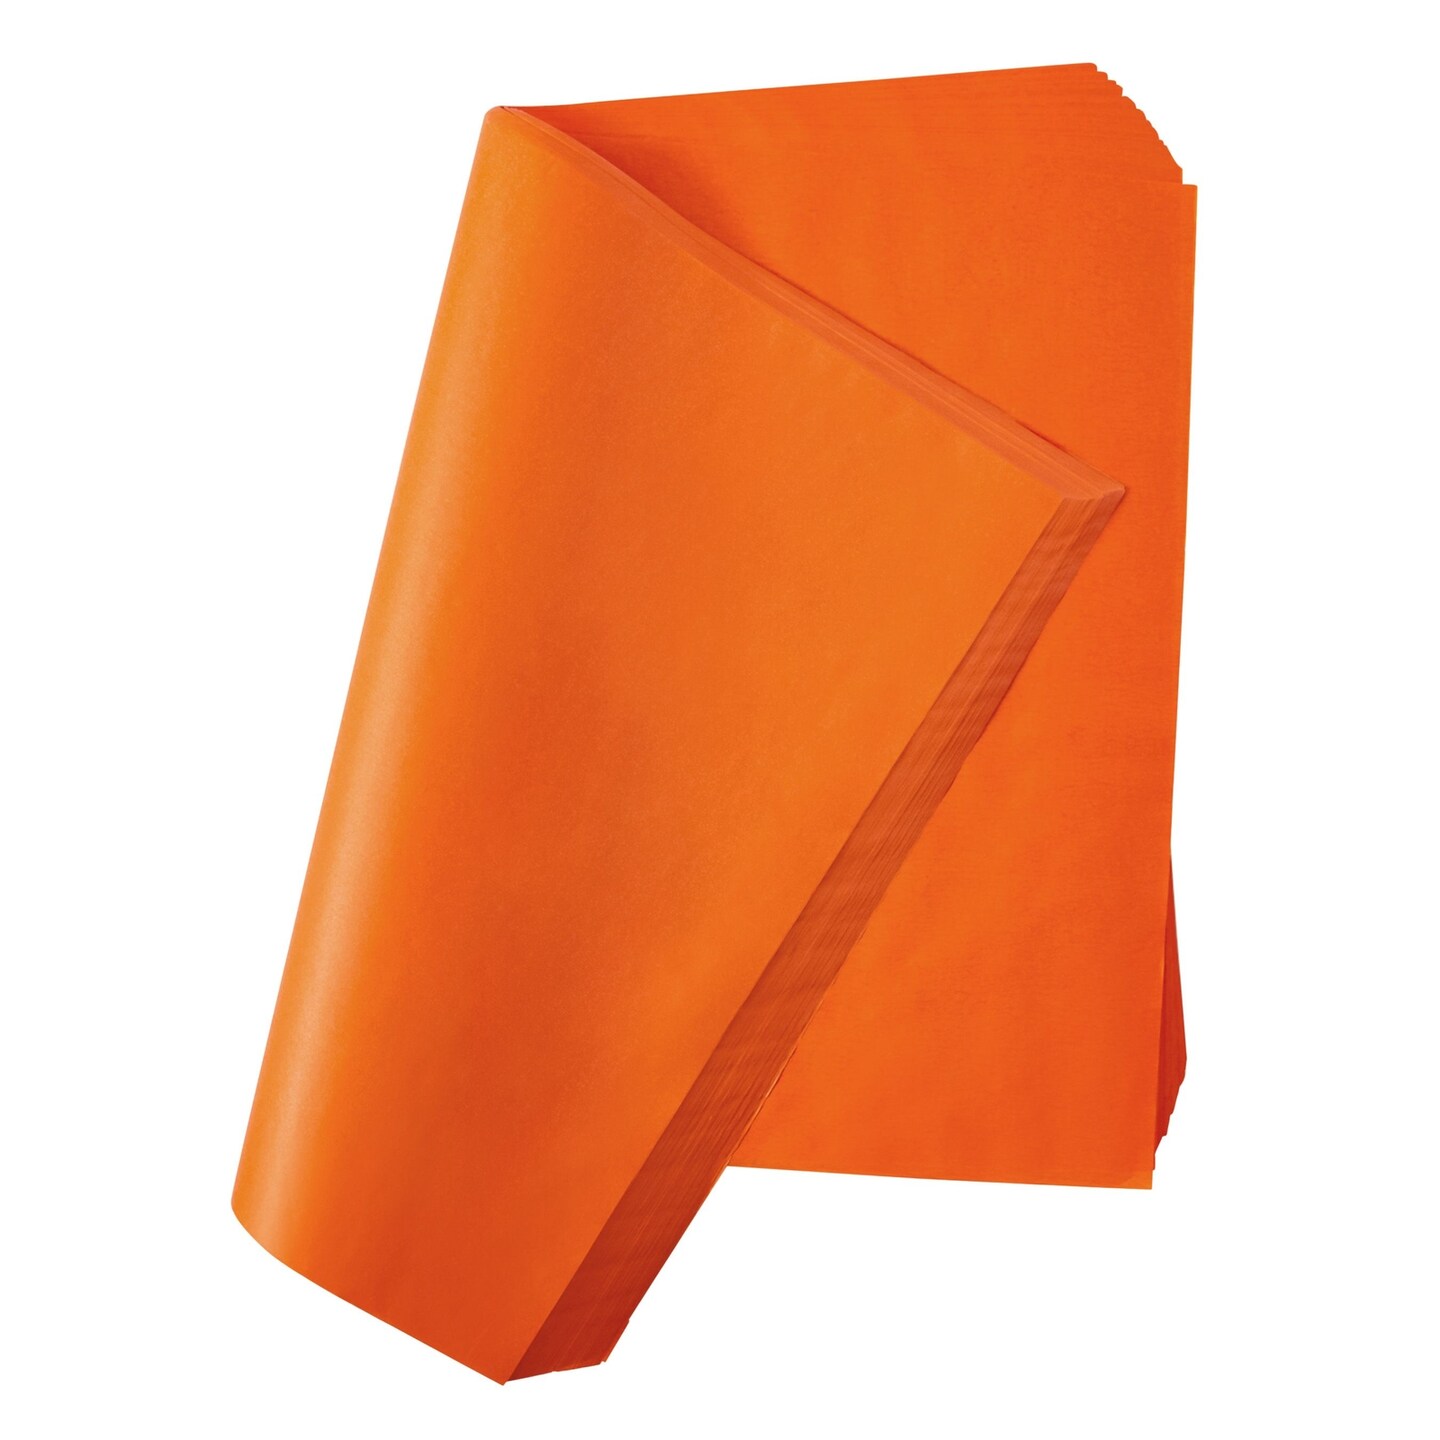 160 Sheets Orange Tissue Paper for Gift Wrapping Bags, Bulk Set for Birthday Party, Holidays, Art Crafts, 15 x 20 Inches